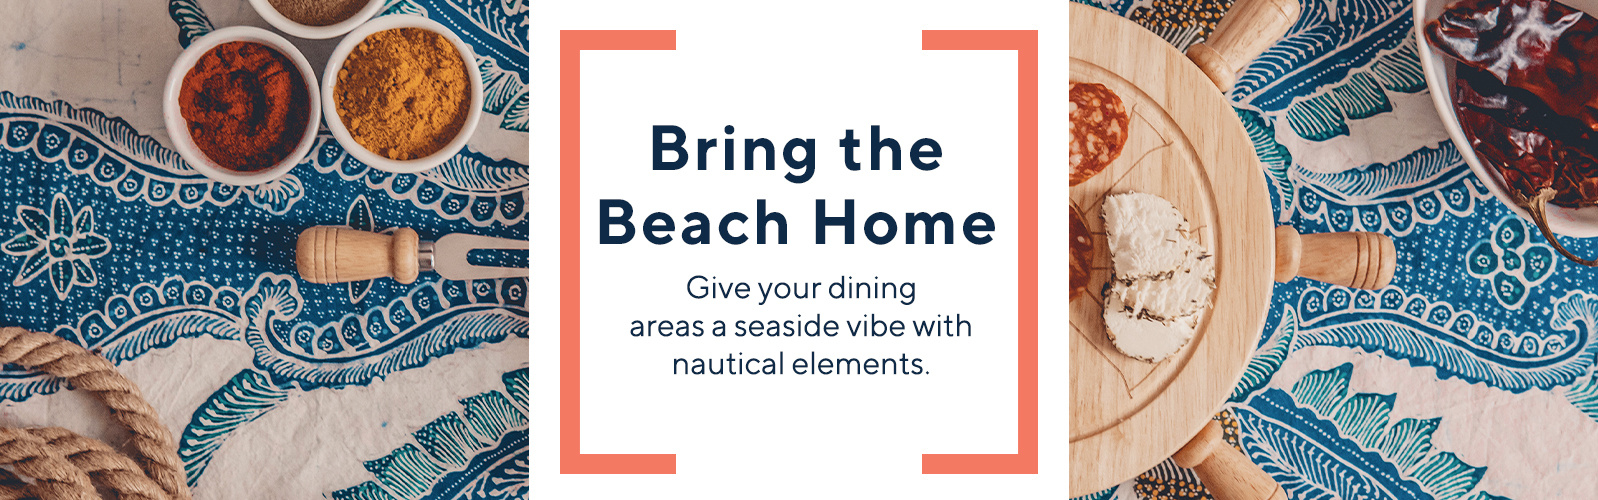 Bring the Beach Home  Give your dining areas a seaside vibe with nautical elements.